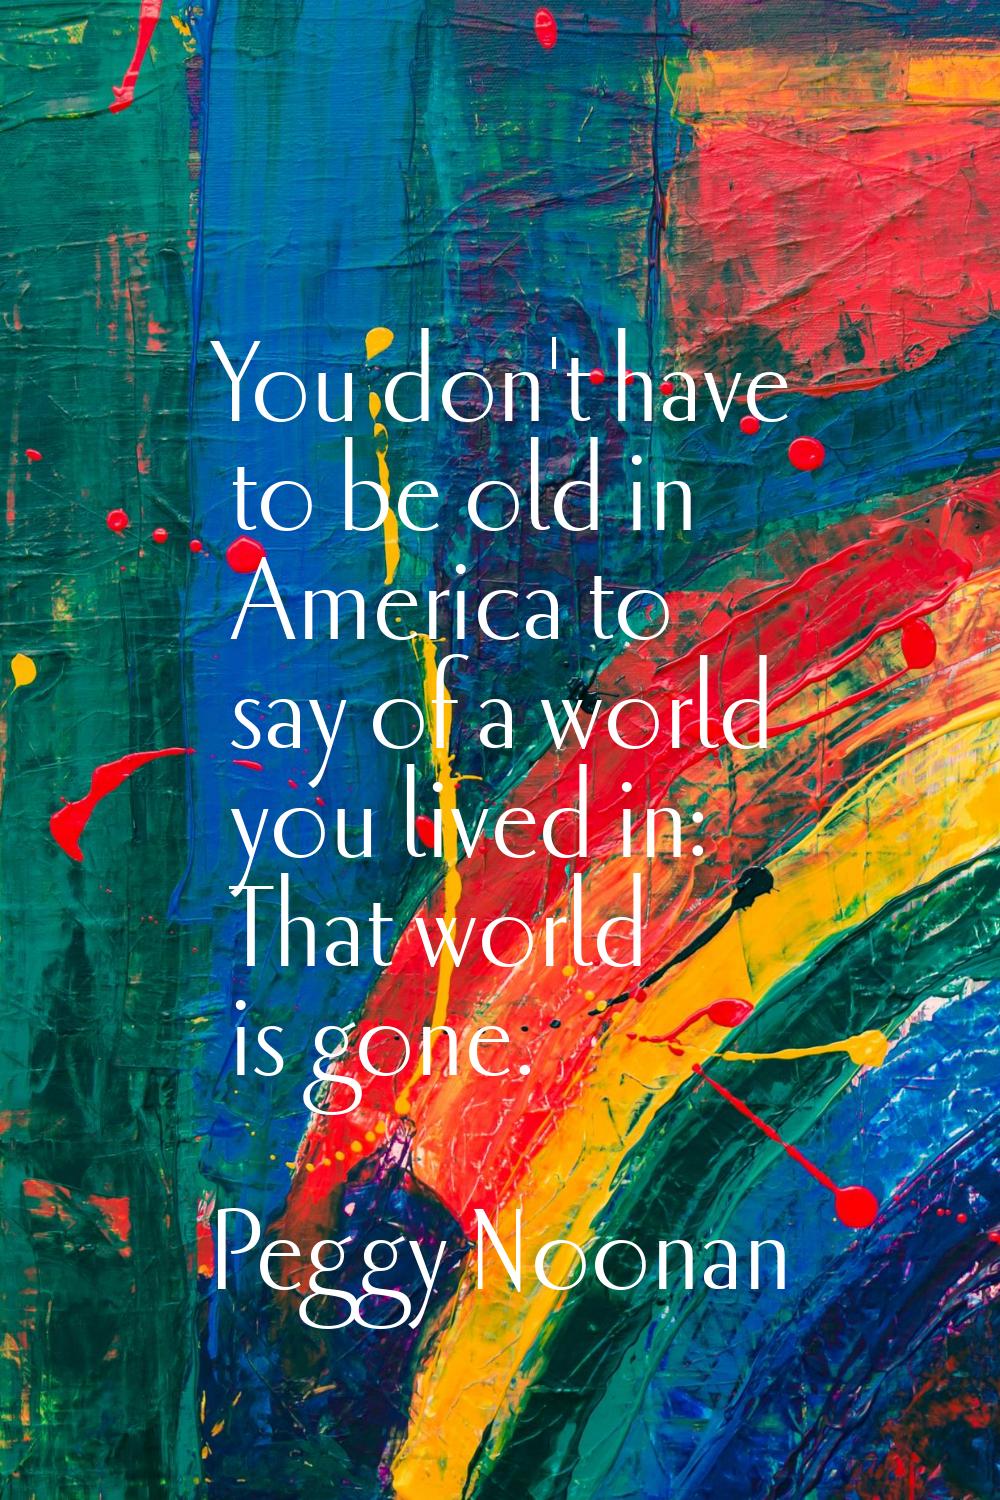 You don't have to be old in America to say of a world you lived in: That world is gone.